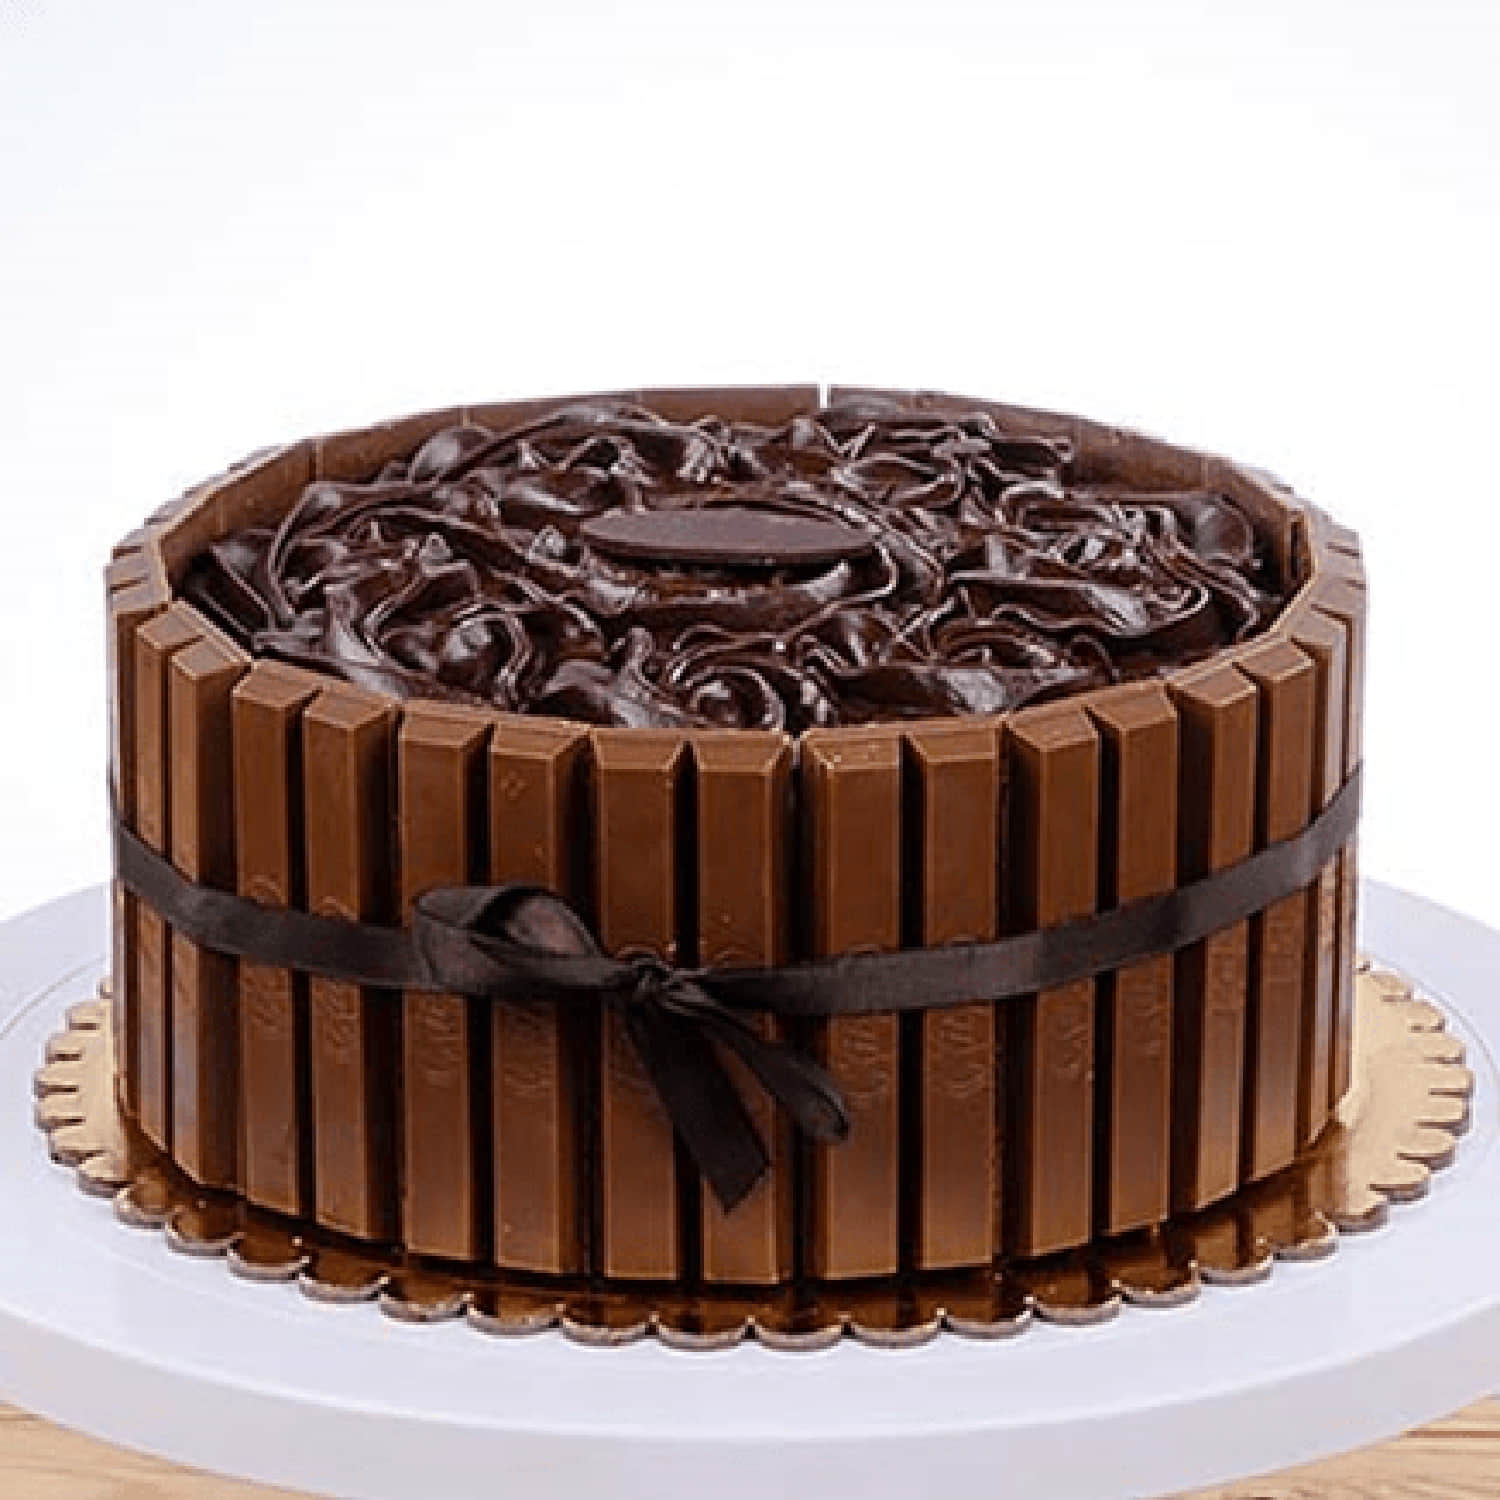 chocolate garnish cake for mothers day (code: 477) – KANPUR CAKE AND FLOWERS